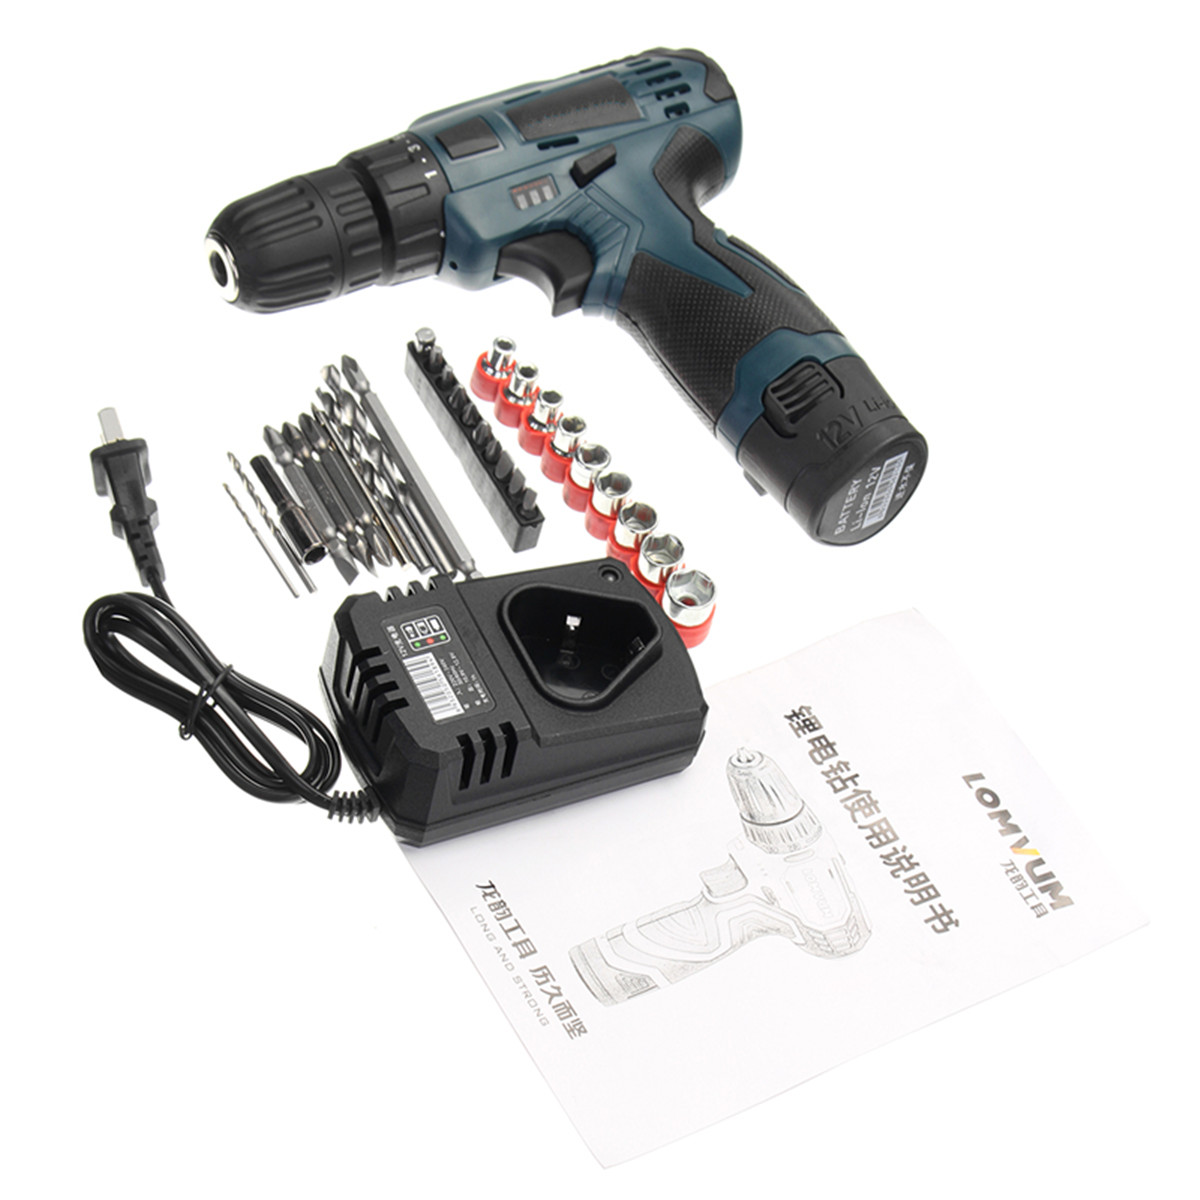 12V-Li-Ion-Cordless-Electric-Screwdriver-Power-Drill-Driver-Hand-Accessories-Kit-2-Speed-LED-Light-1284861-4